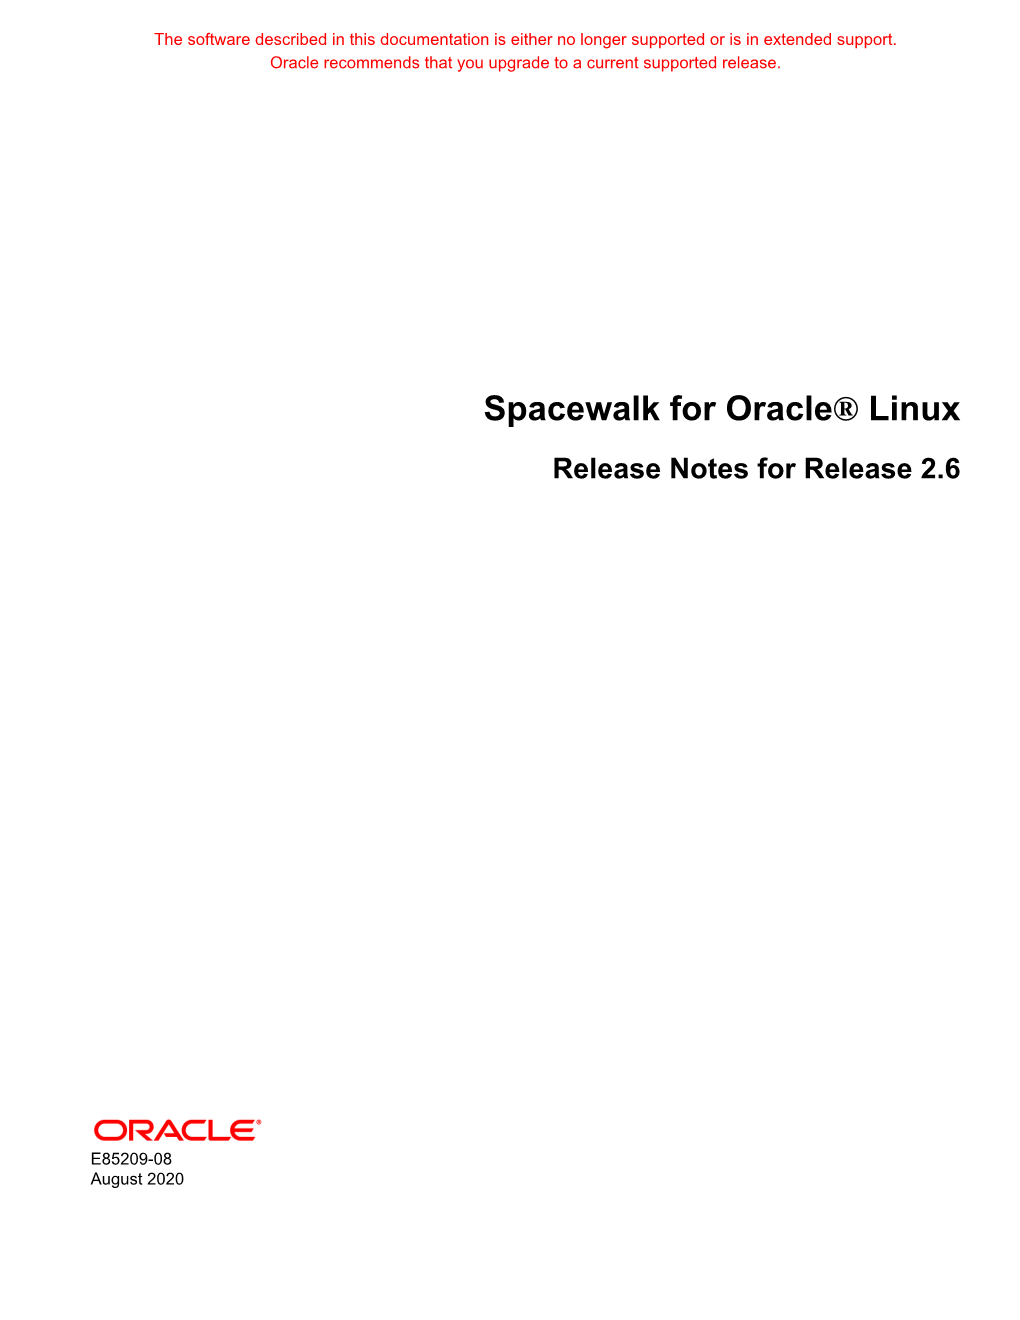 Spacewalk for Oracle® Linux Release Notes for Release 2.6